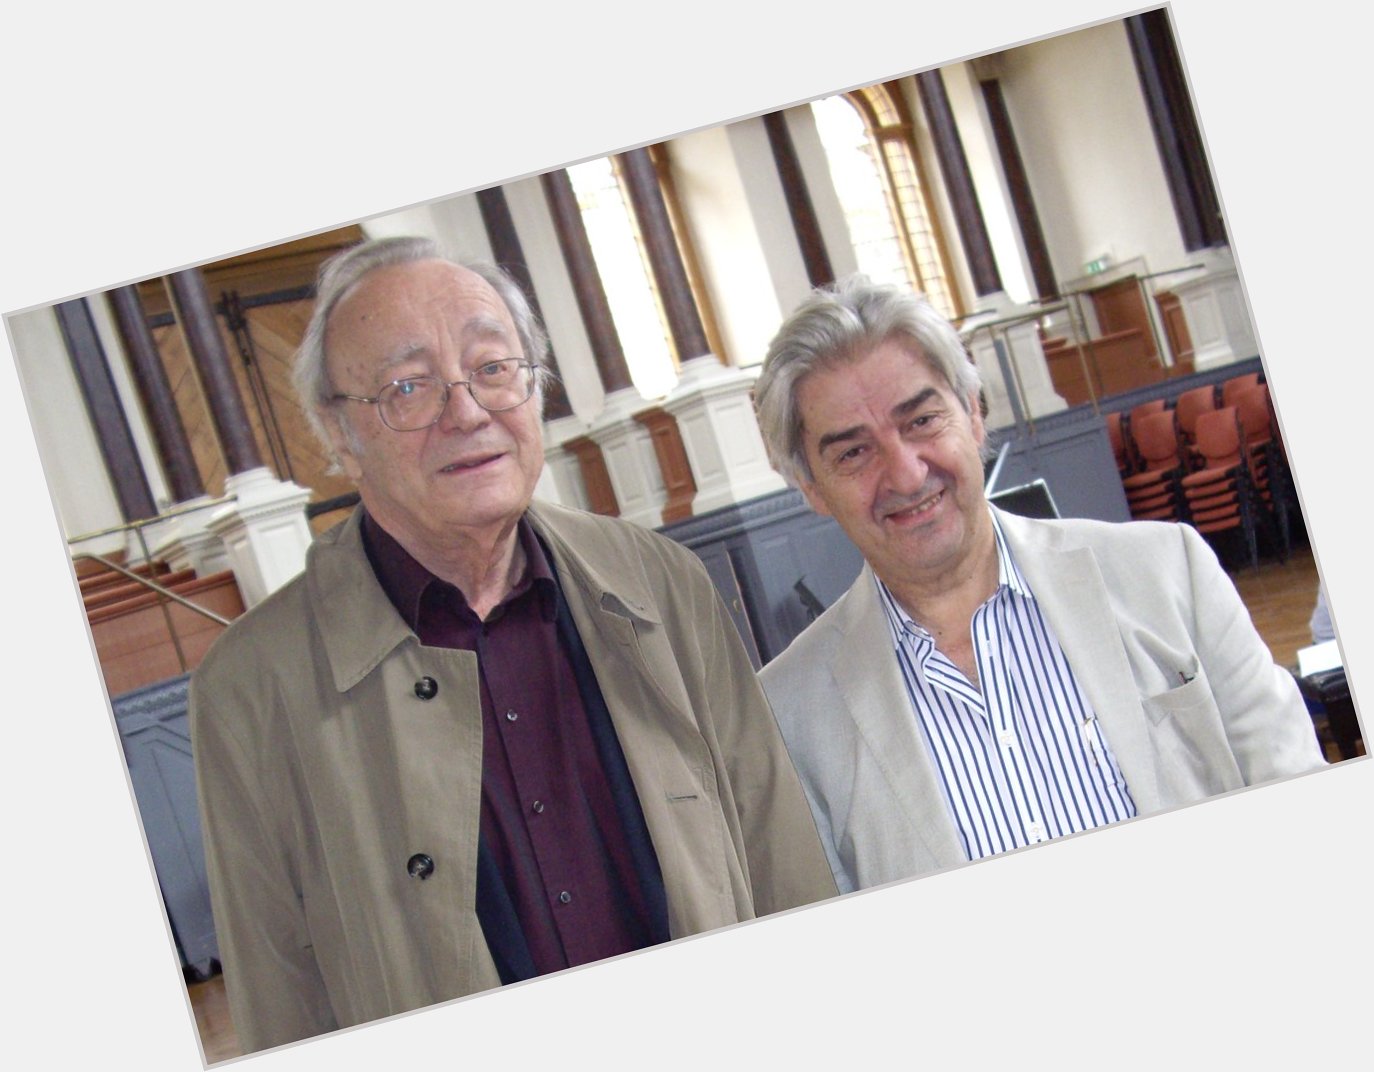 Wishing a very happy 90th birthday to Alfred Brendel! 

Many happy memories of Oxford Piano Festivals past 